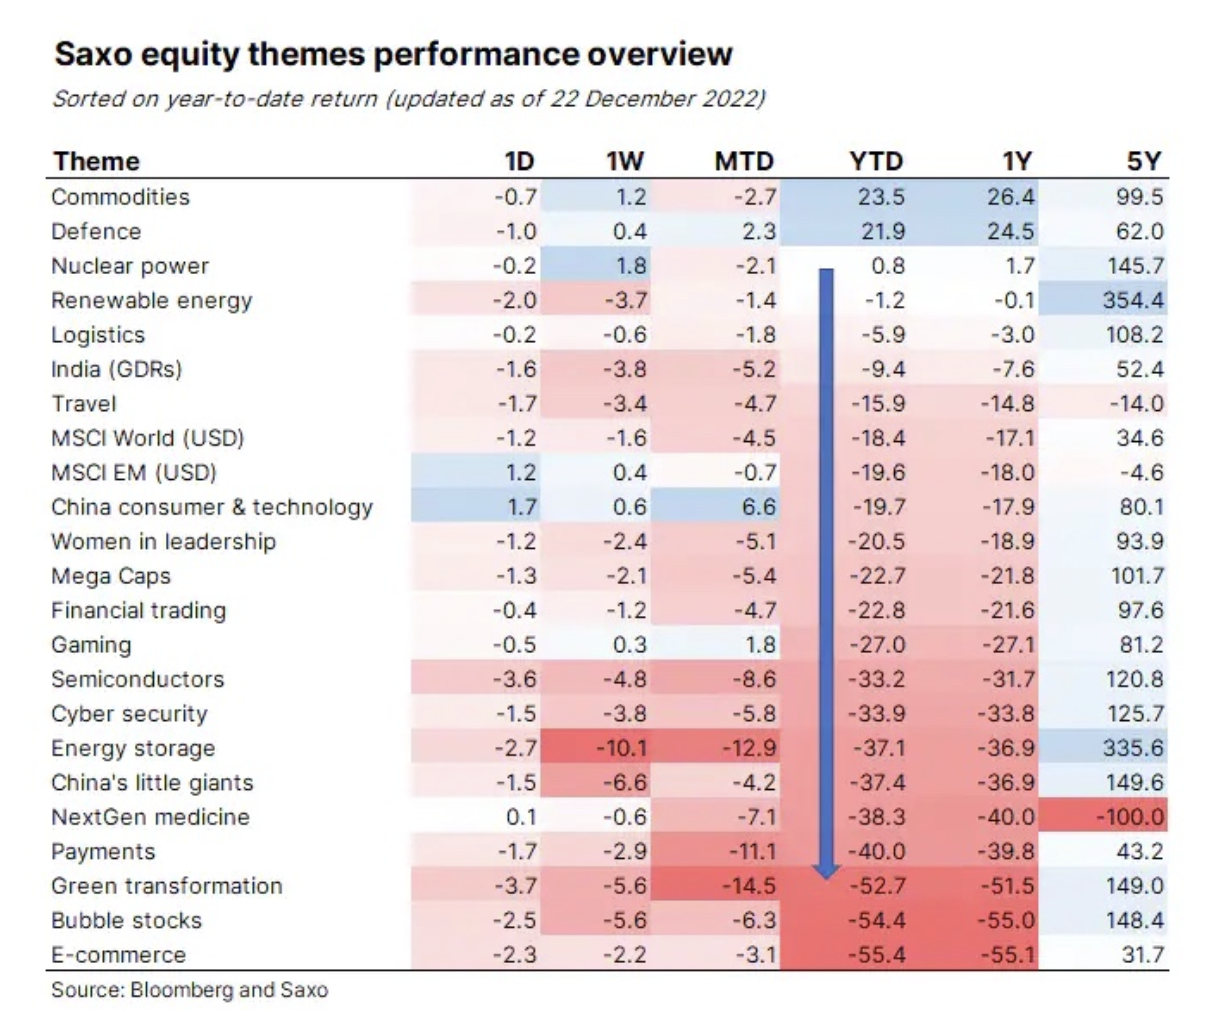 saxo equity themes